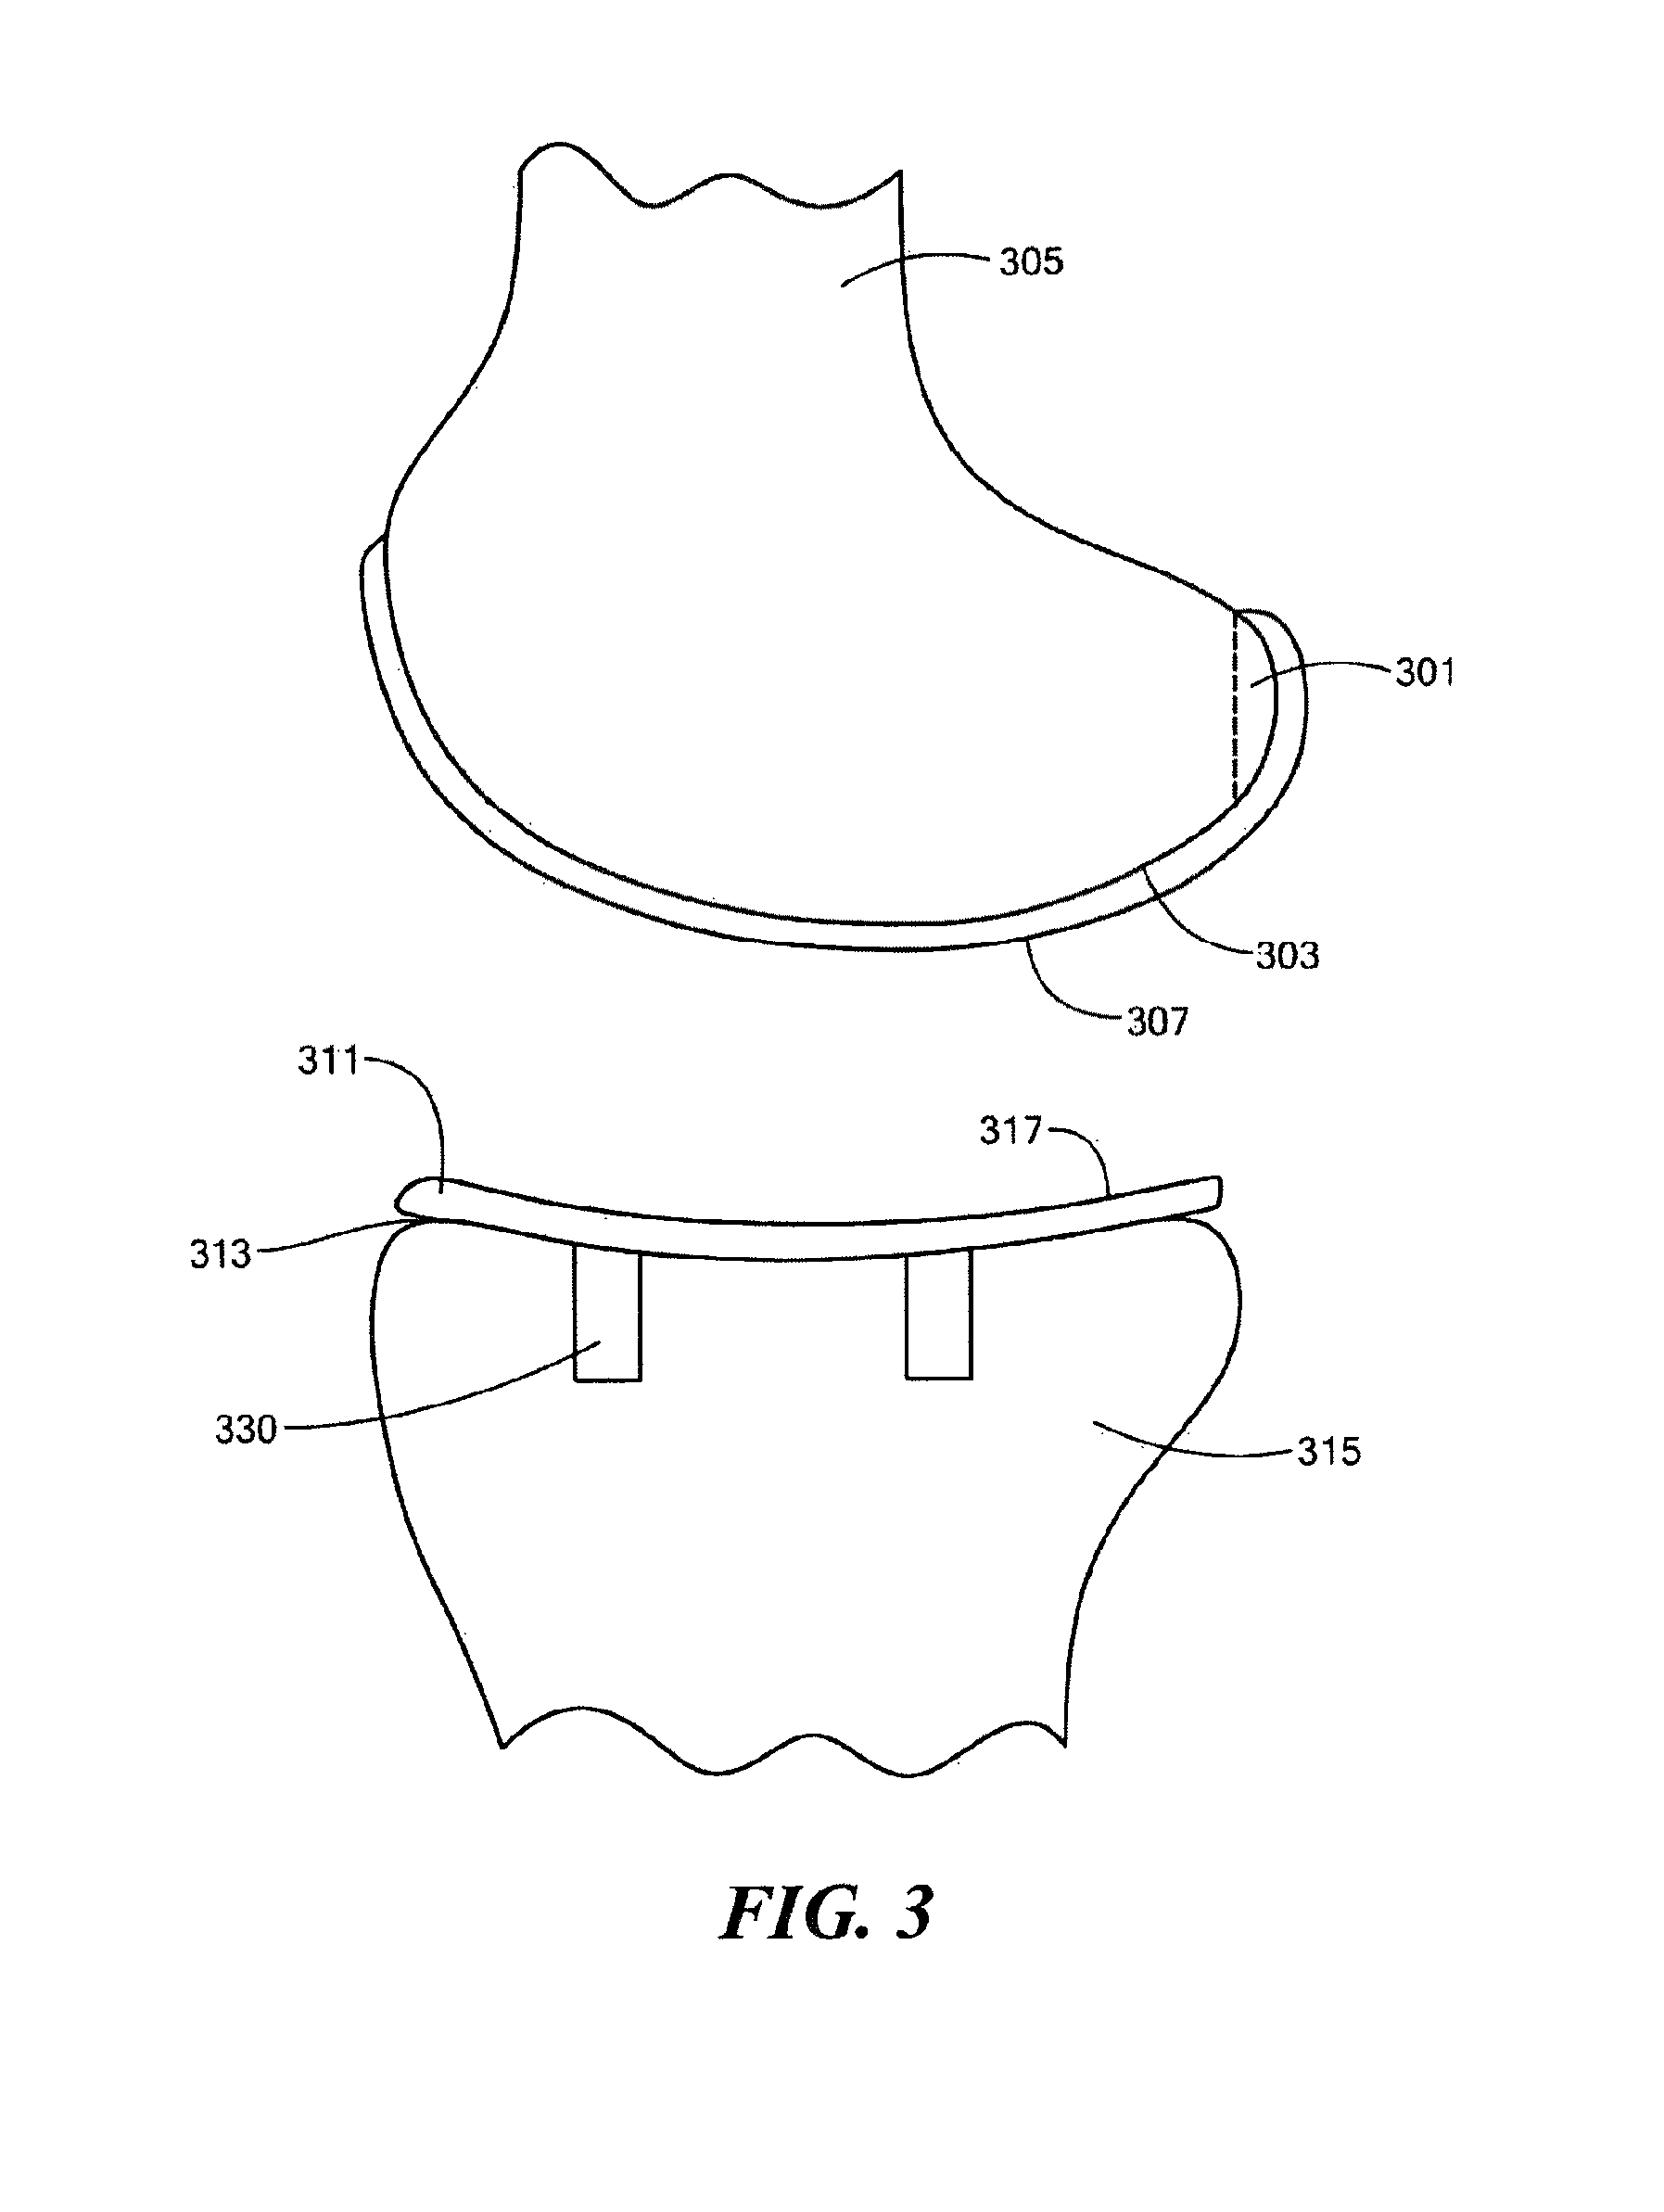 Implant device and method for manufacture